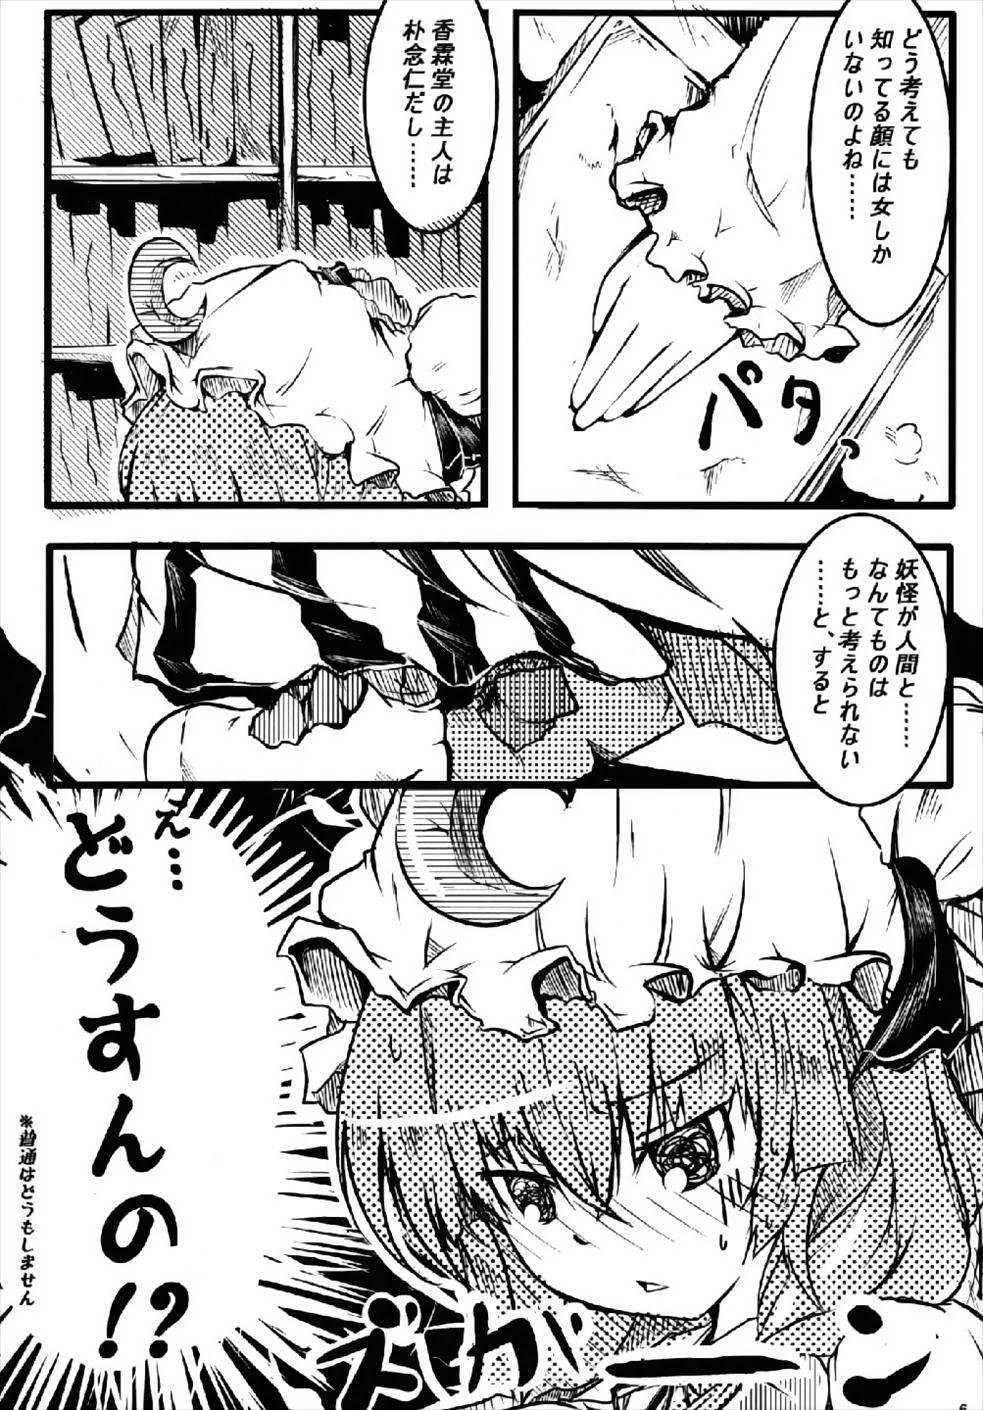 Hugetits RemiFlaPatche! - Touhou project Grande - Page 5